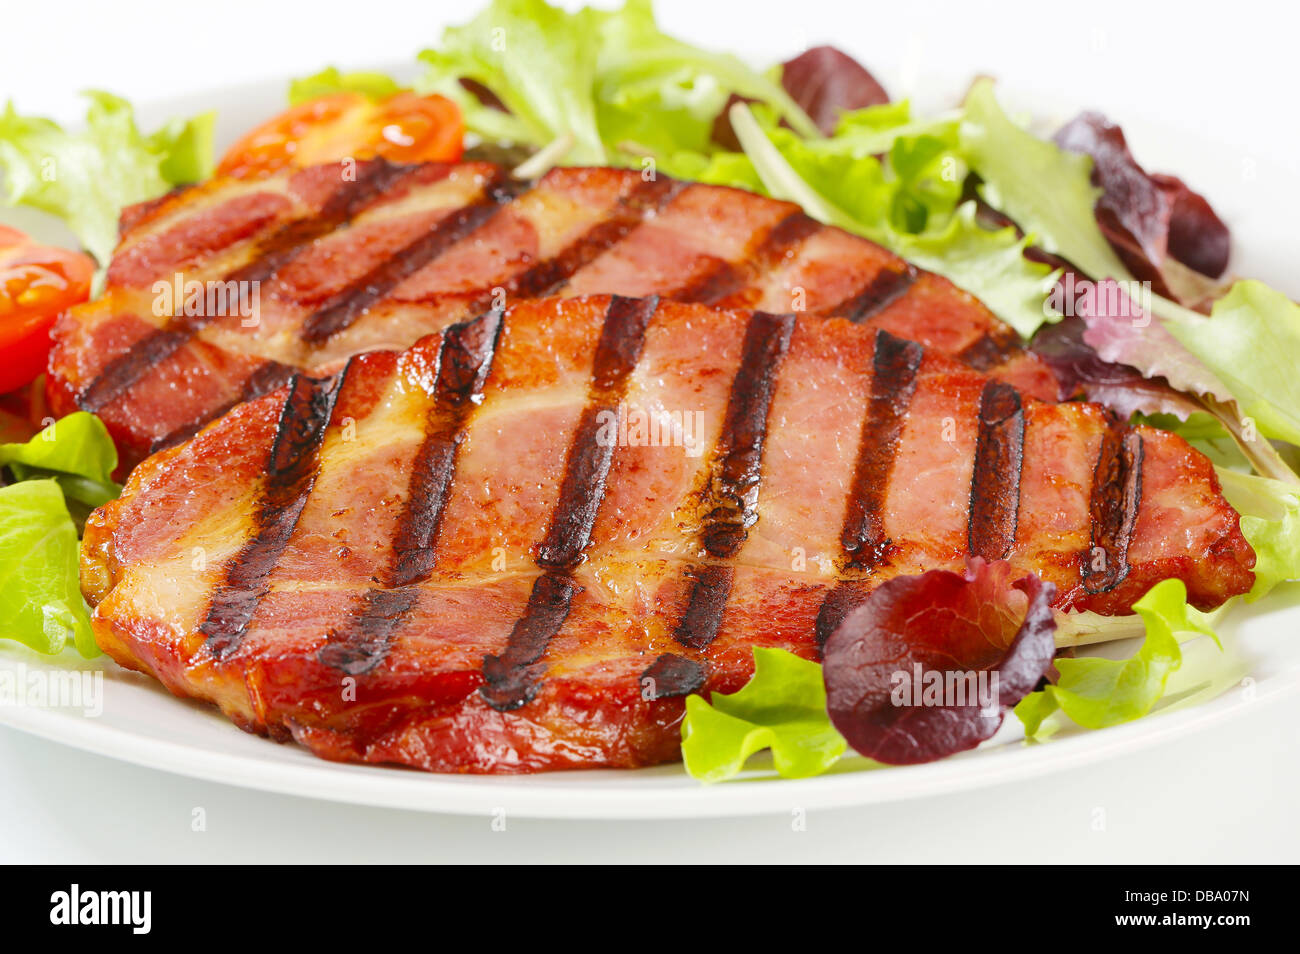 Grilled pork neck meat with salad greens Stock Photo